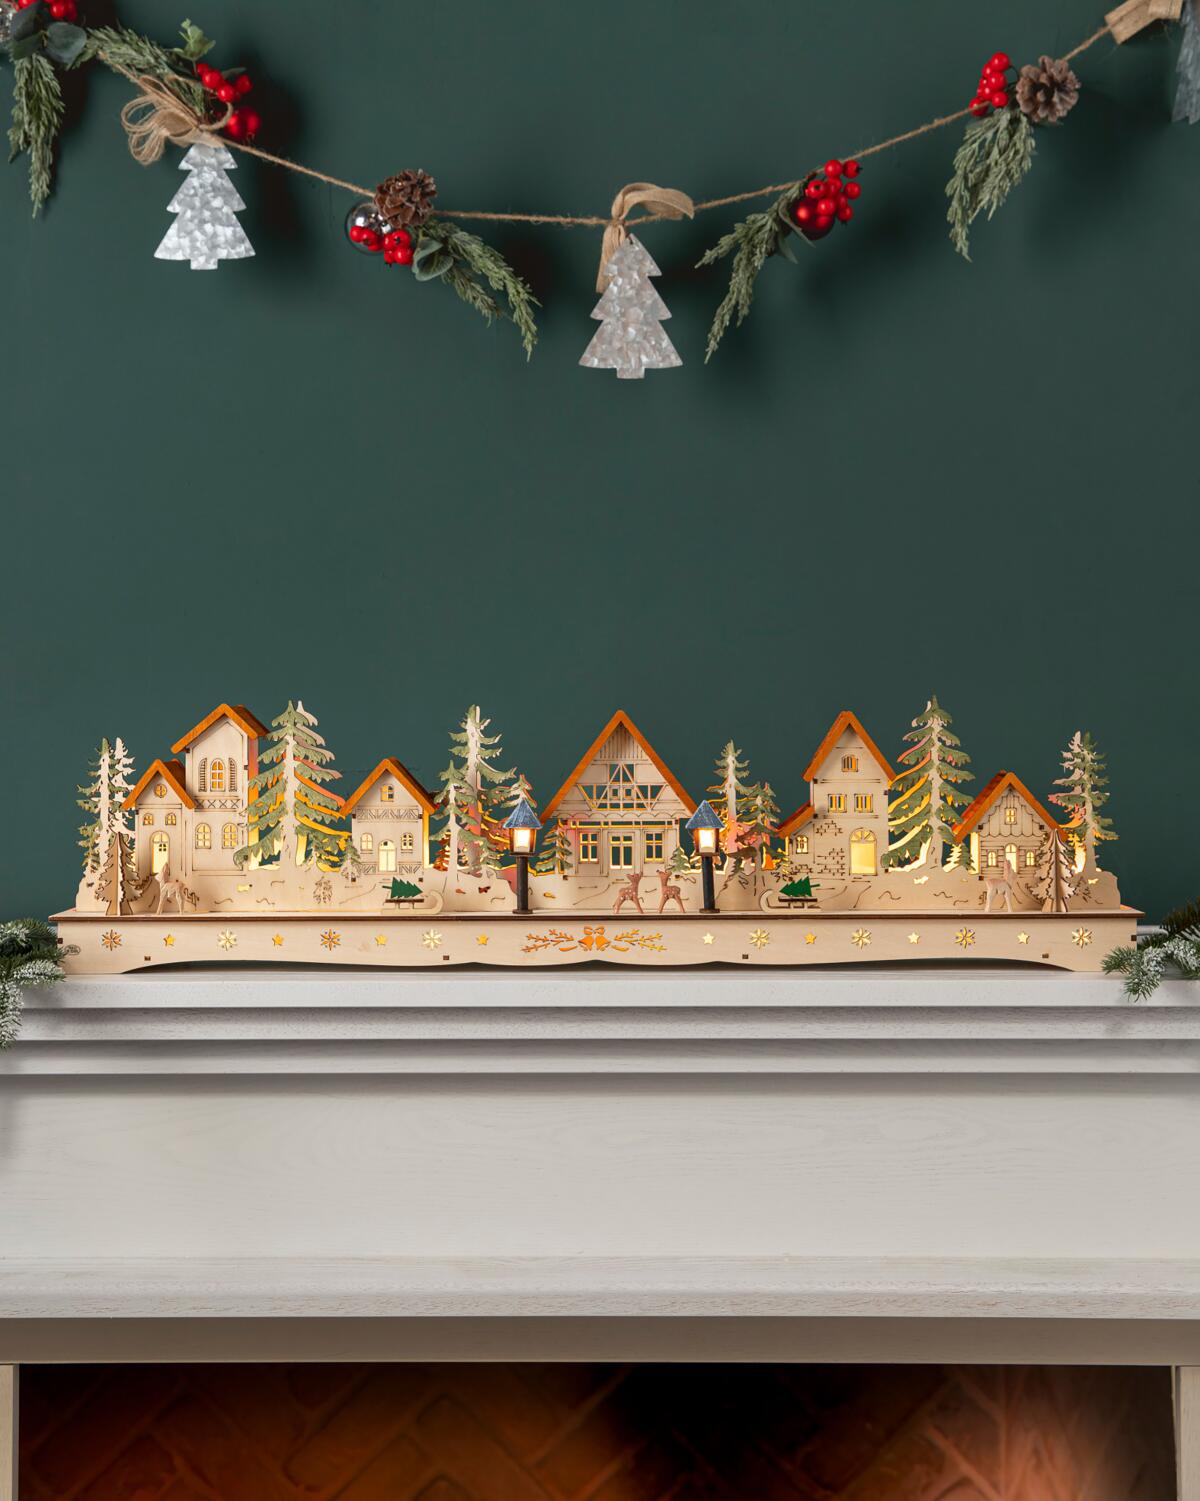 Miniature Christmas village displays are still a big deal in the US, Features